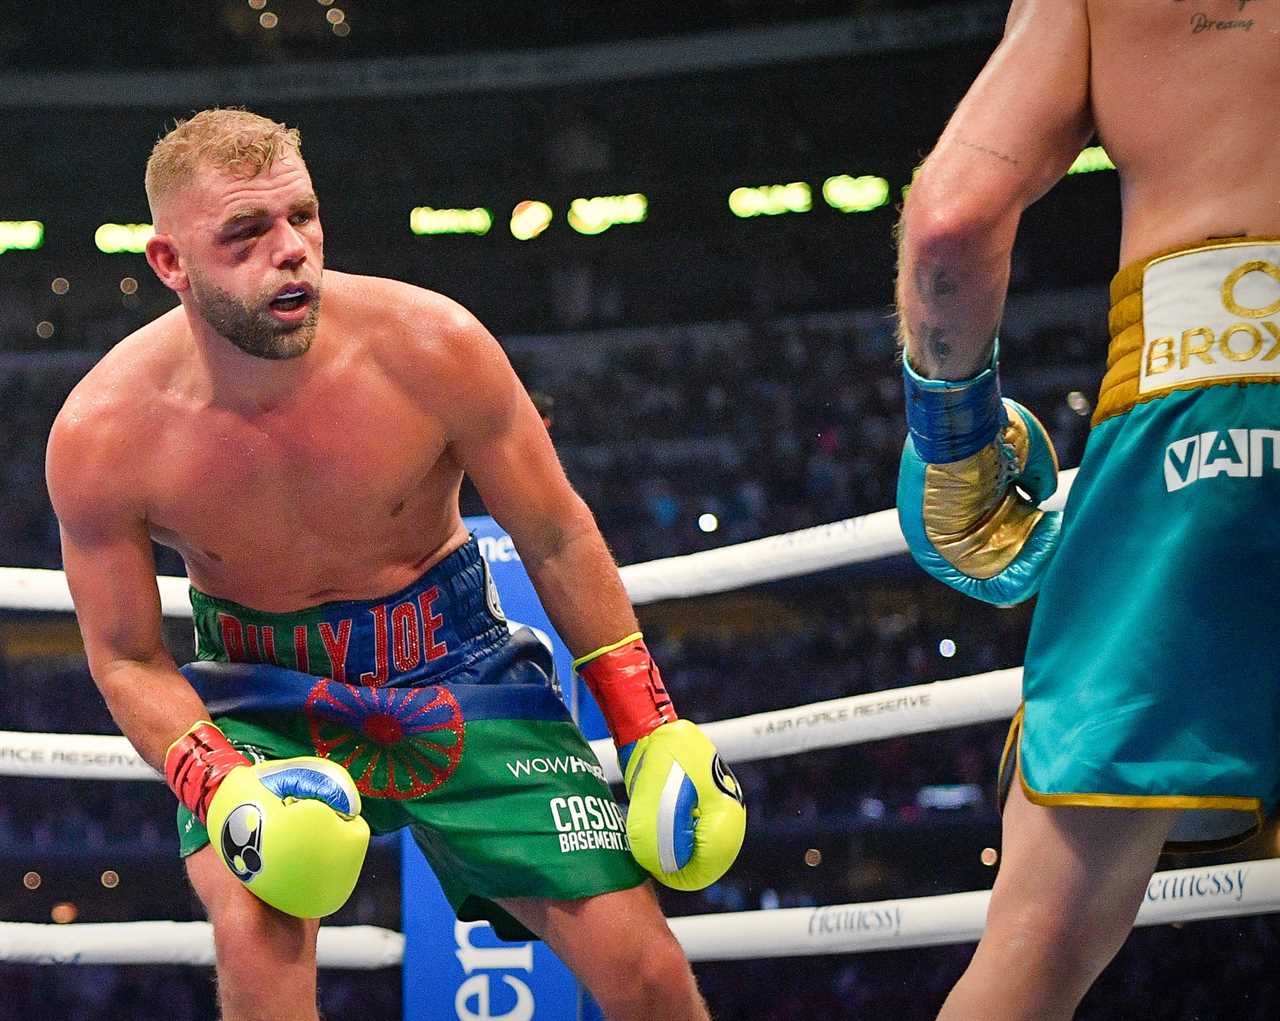 Billy Joe Saunders really wants Chris Eubank Jr. rematch. He is expected to fight again, despite retirement rumours